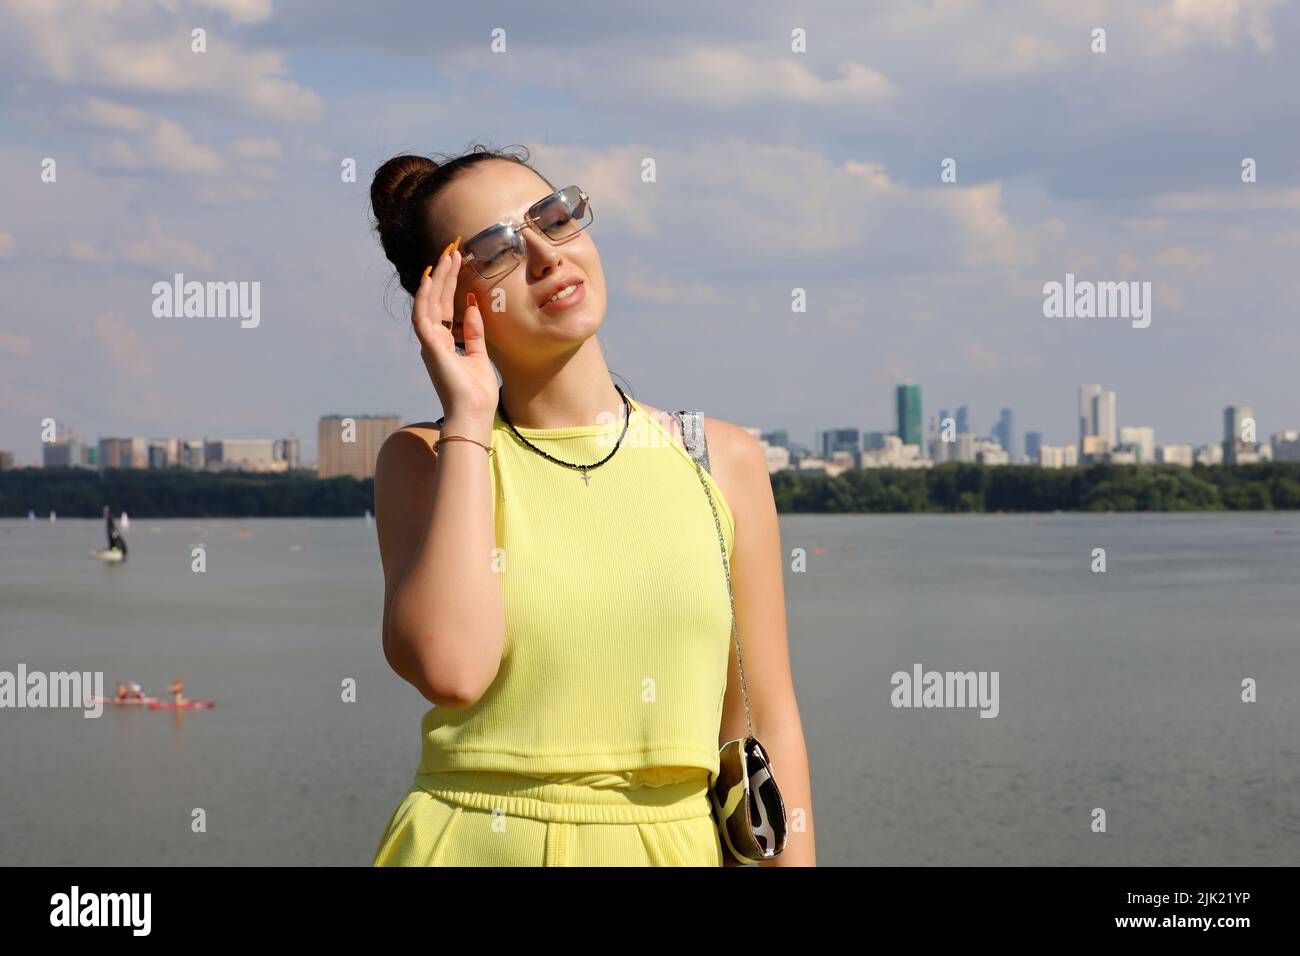 Portrait of sensual girl in sunglasses and yellow summer suit standing on a beach on background of city buildings. Females fashion and beauty Stock Photo